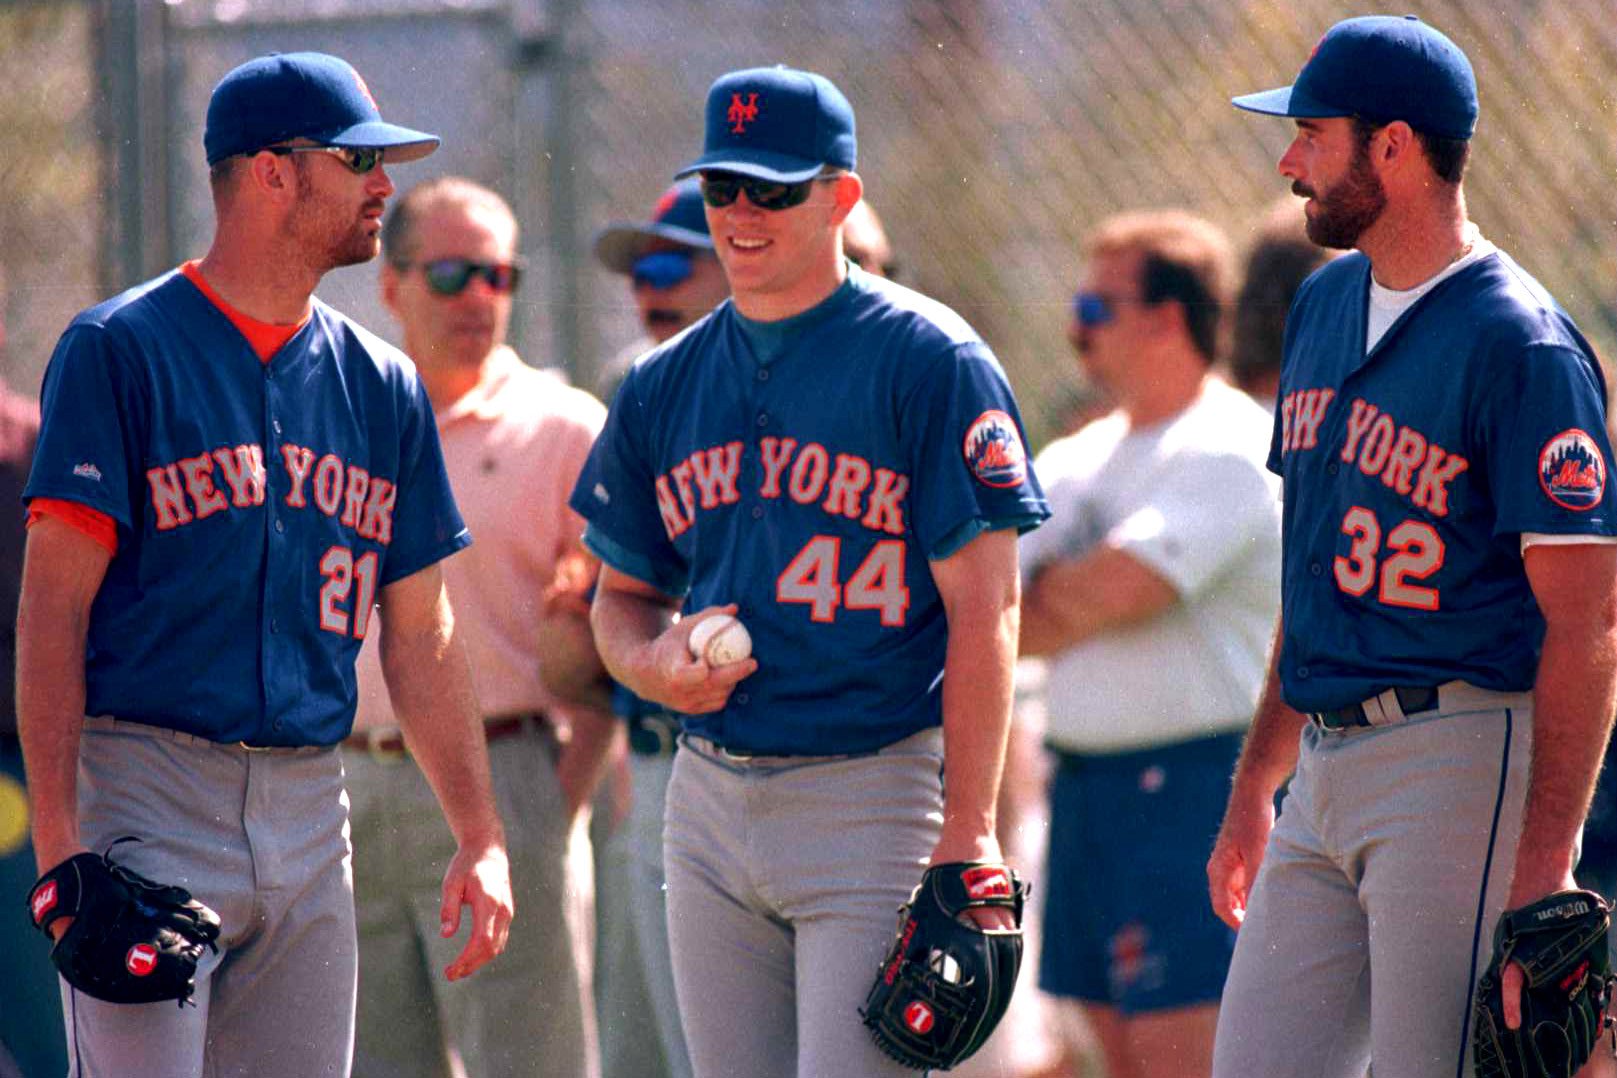 MetsRewind on X: On this day in history, the @Mets drafted some very  memorable names including Darryl Strawberry (1980), Billy Beane (1980),  Gregg Jefferies (1985), Bill Pulsipher (1991), Jason Isringhausen (1991),  Benny